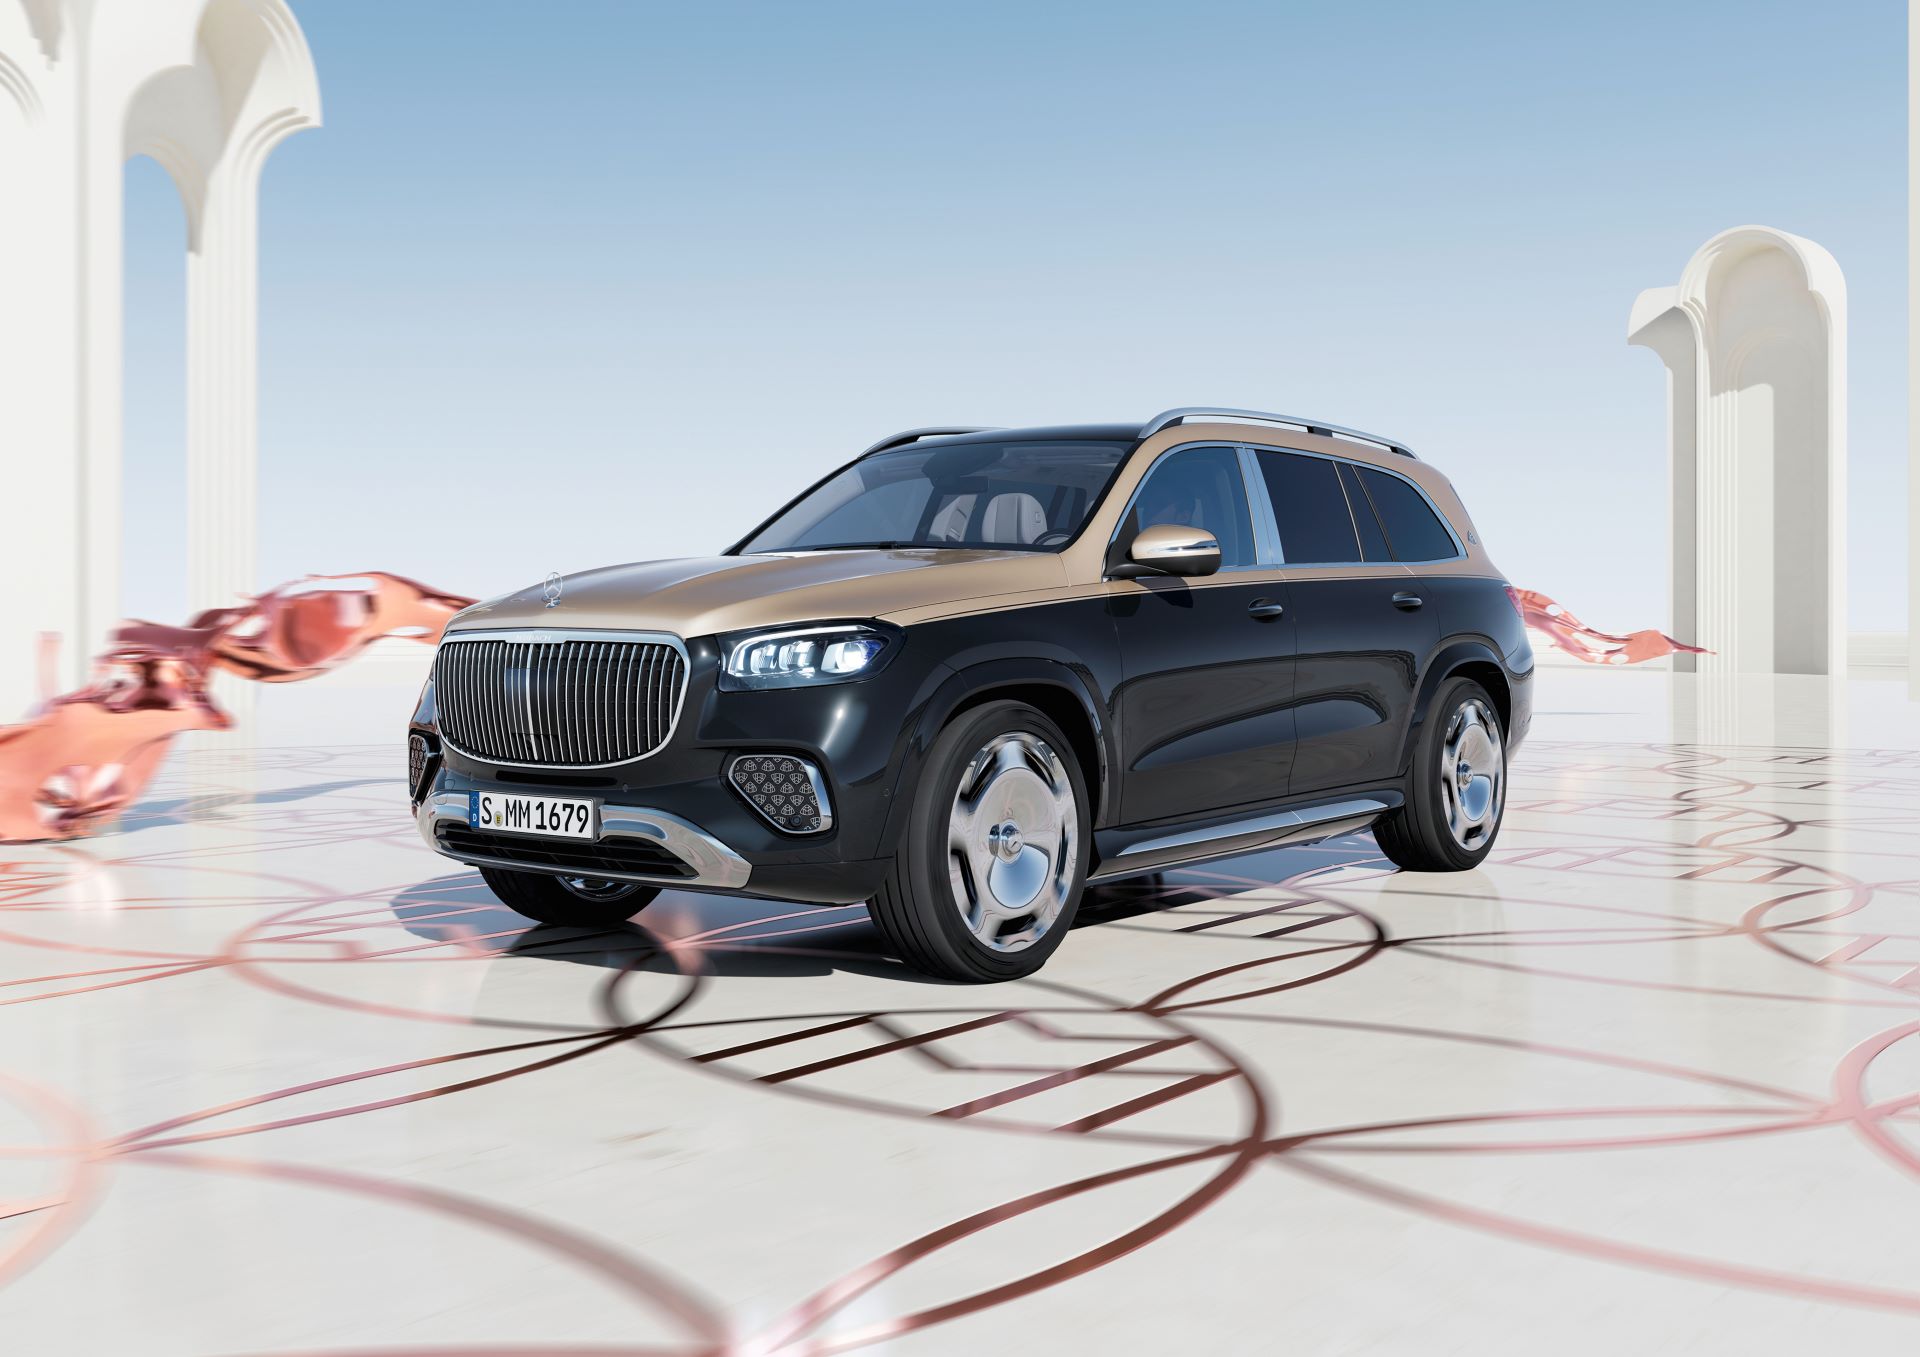 Elevating Luxury and Capability: The Revamped Mercedes-Benz GLS and Maybach GLS Models